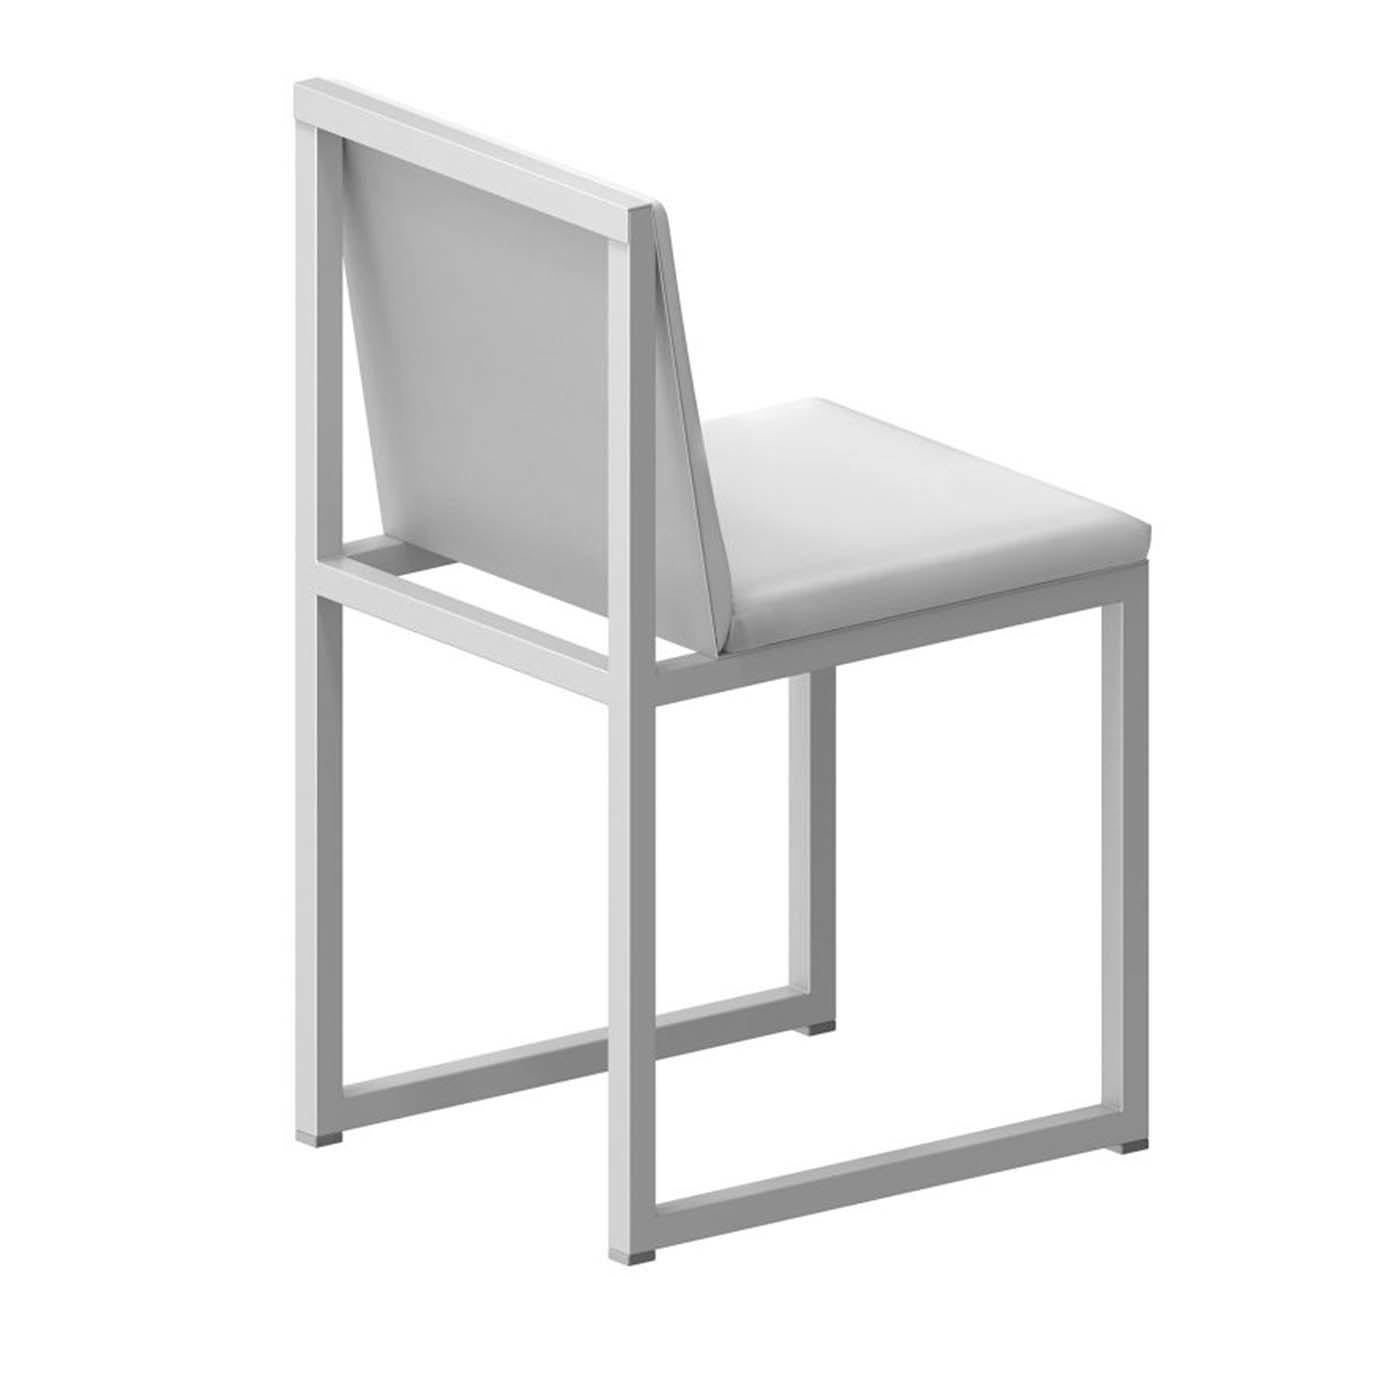 Equally suited to everyday dining or special occasions, this exclusive chair is constructed with a geometric, open frame of square steel tubing (25 x 25 mm) that gives it a minimalist and airy look. The steel sheet seat and back feature padded